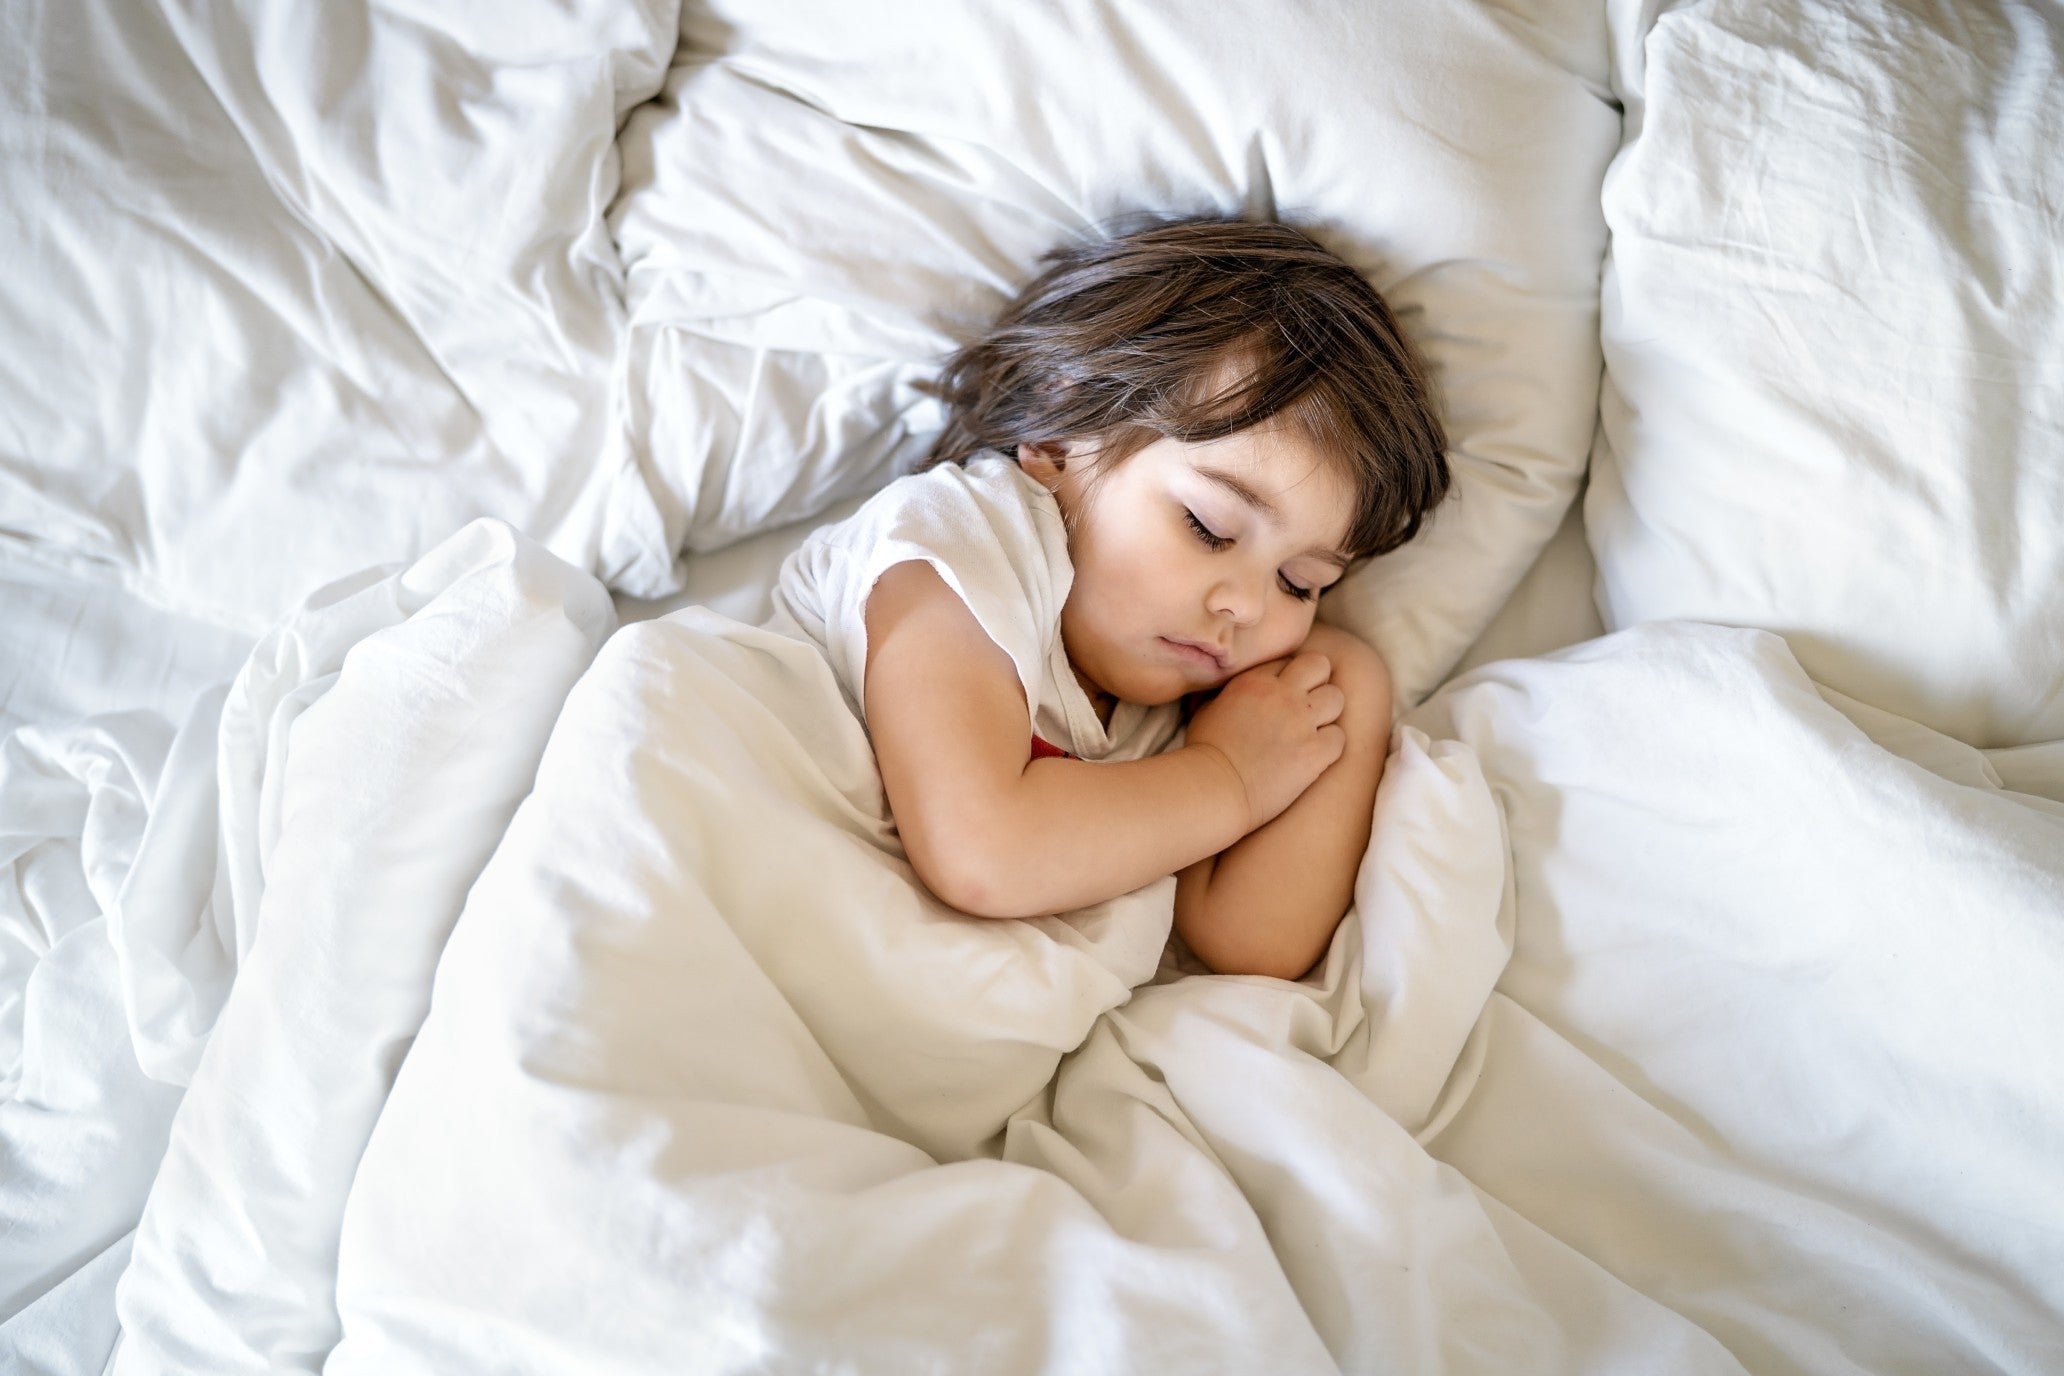 When do I introduce a pillow for my child? – GrowbrightAU